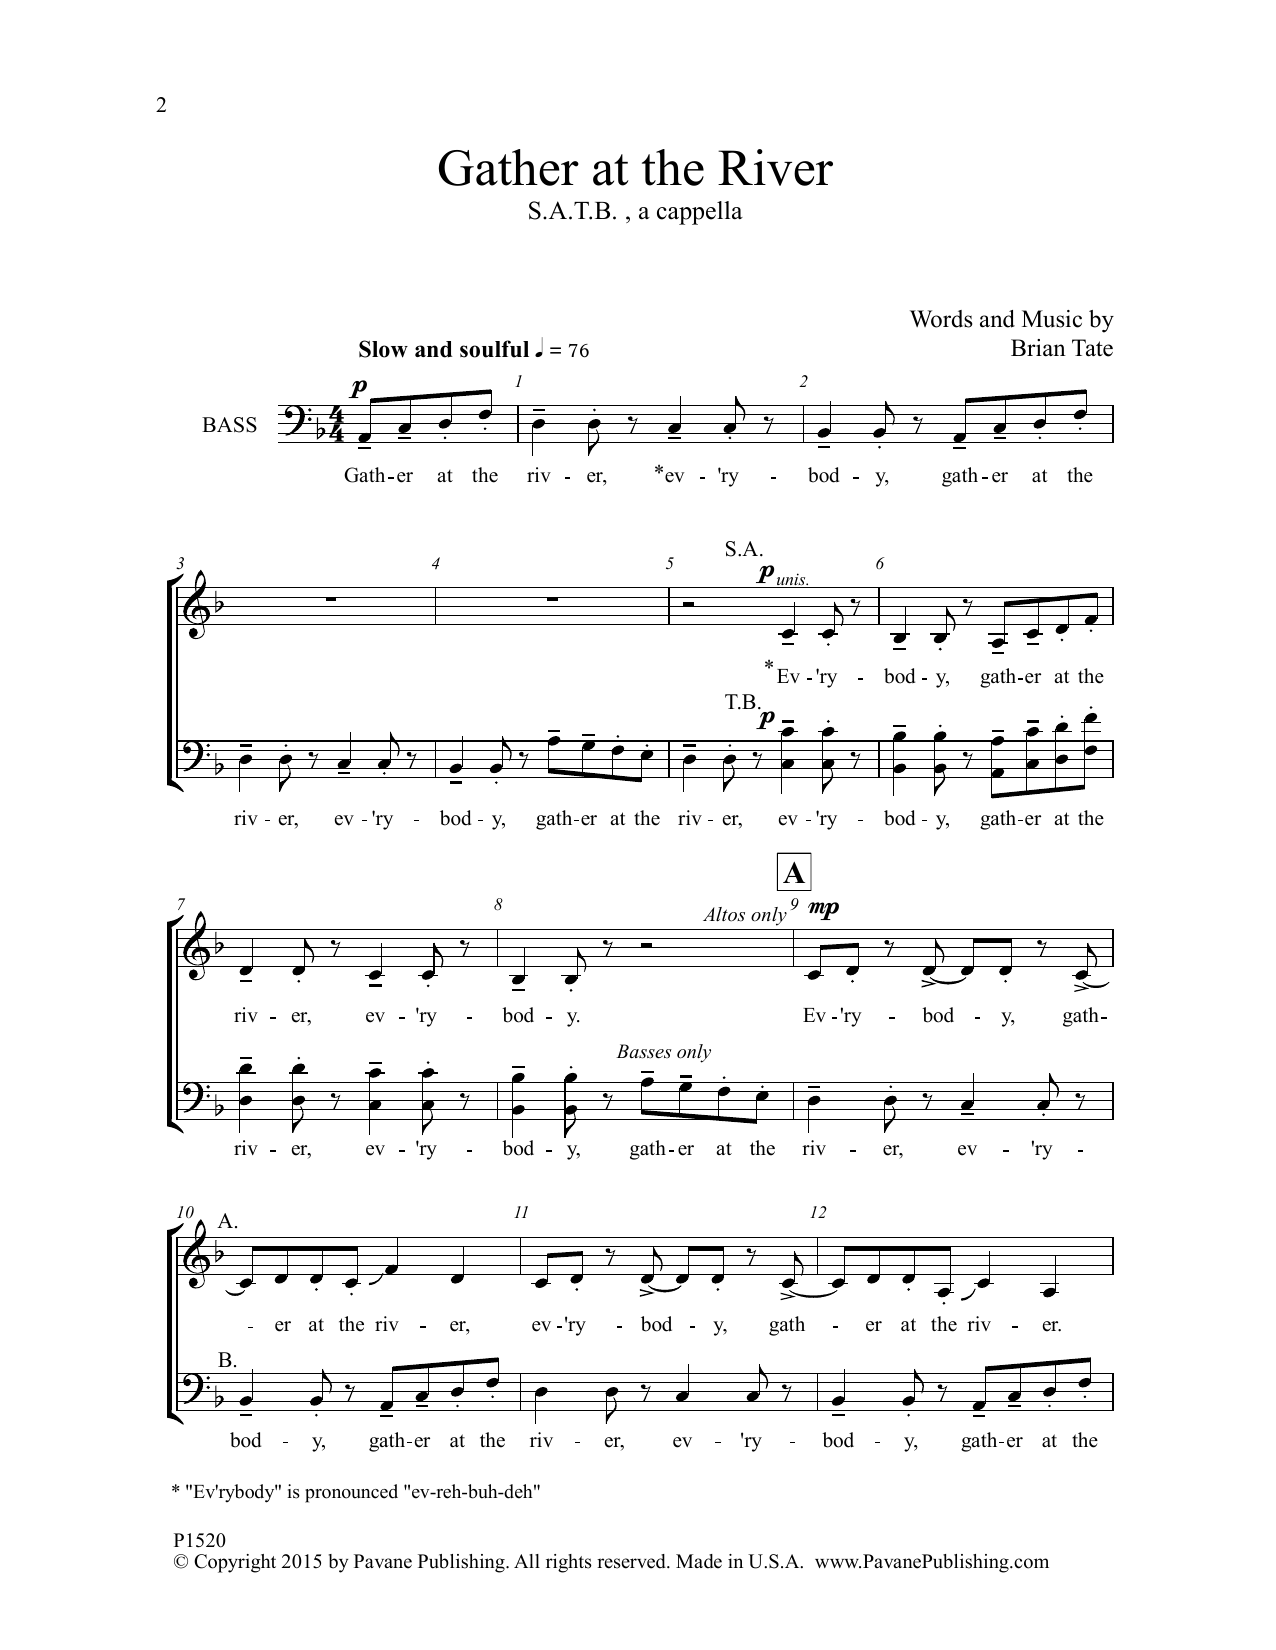 Download Brian Tate Gather at the River Sheet Music